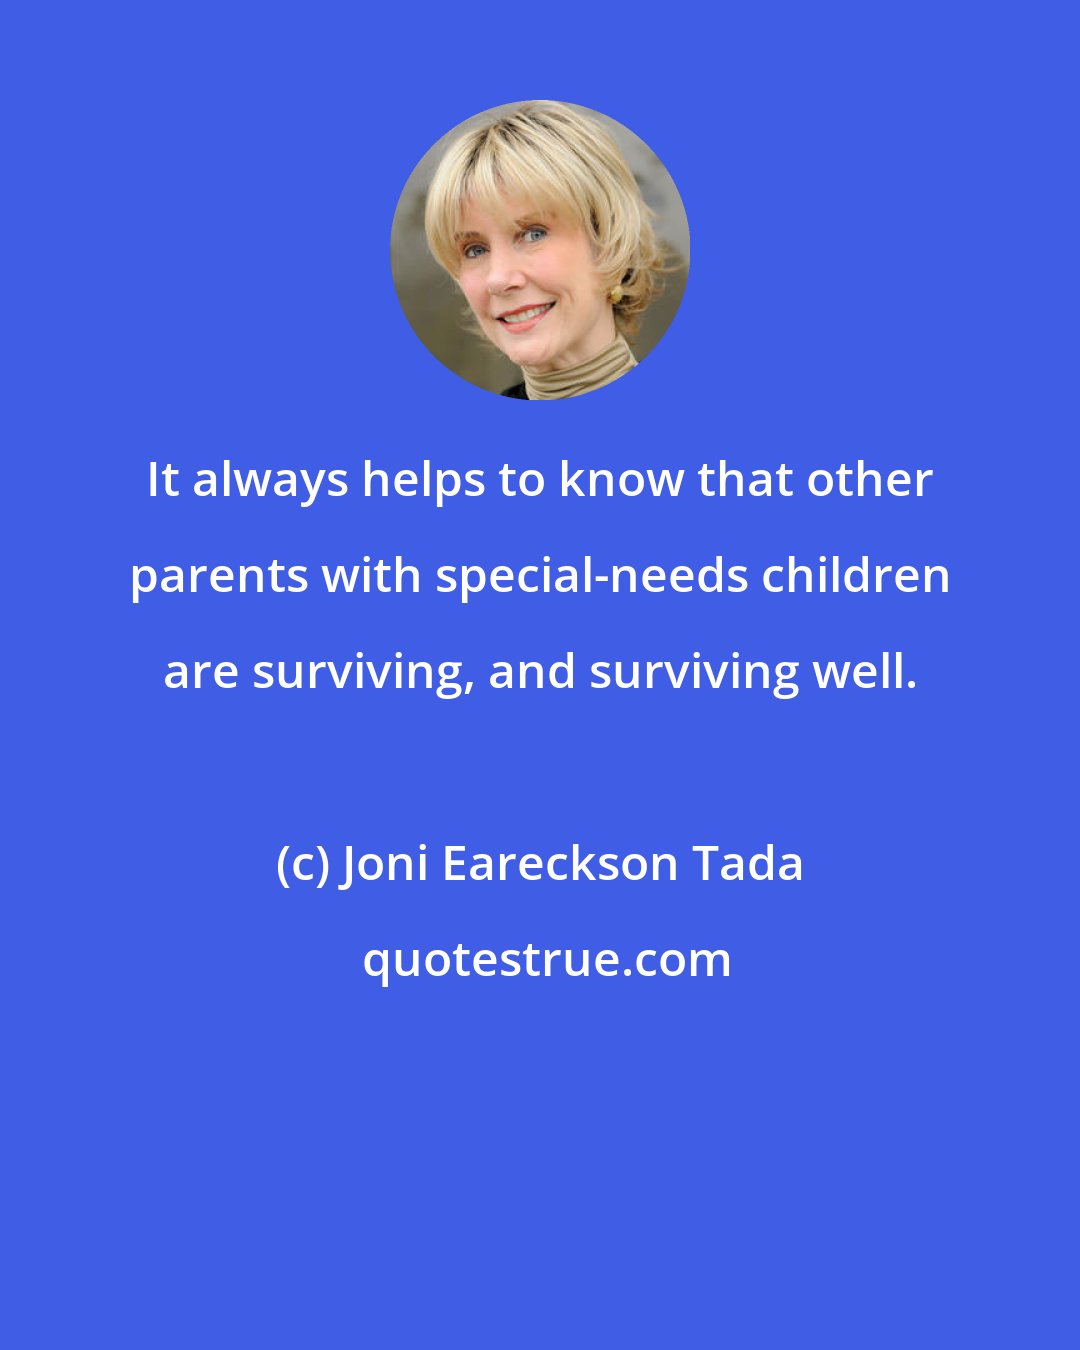 Joni Eareckson Tada: It always helps to know that other parents with special-needs children are surviving, and surviving well.